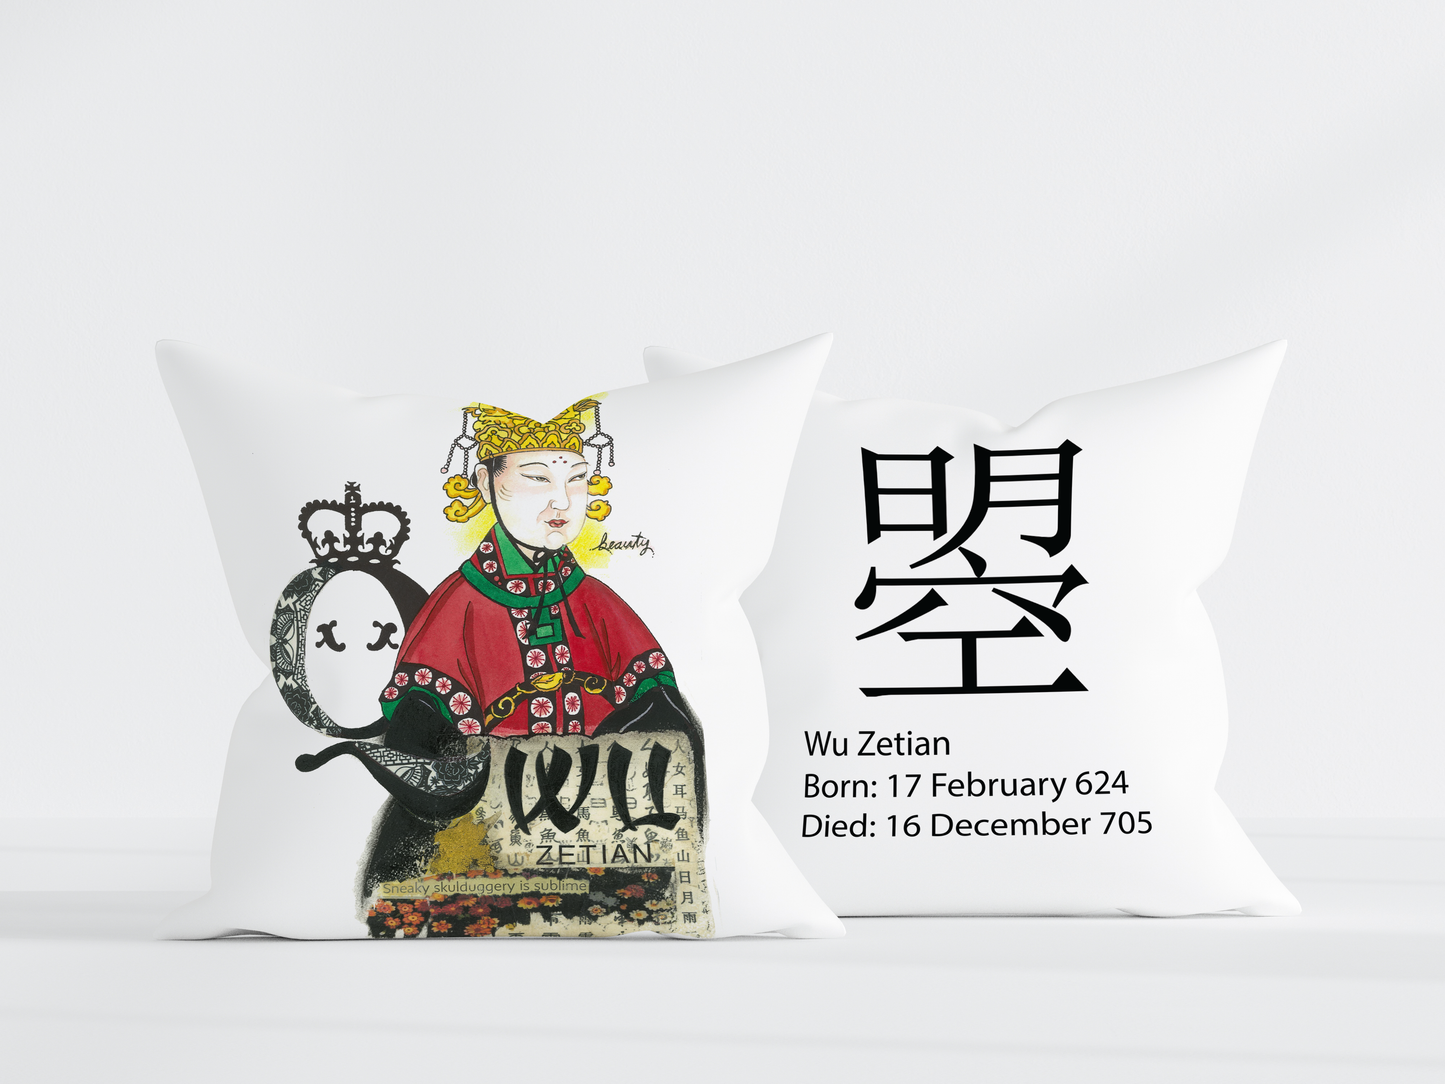 Empress Wu in Colour Pillow Cover - 18x18